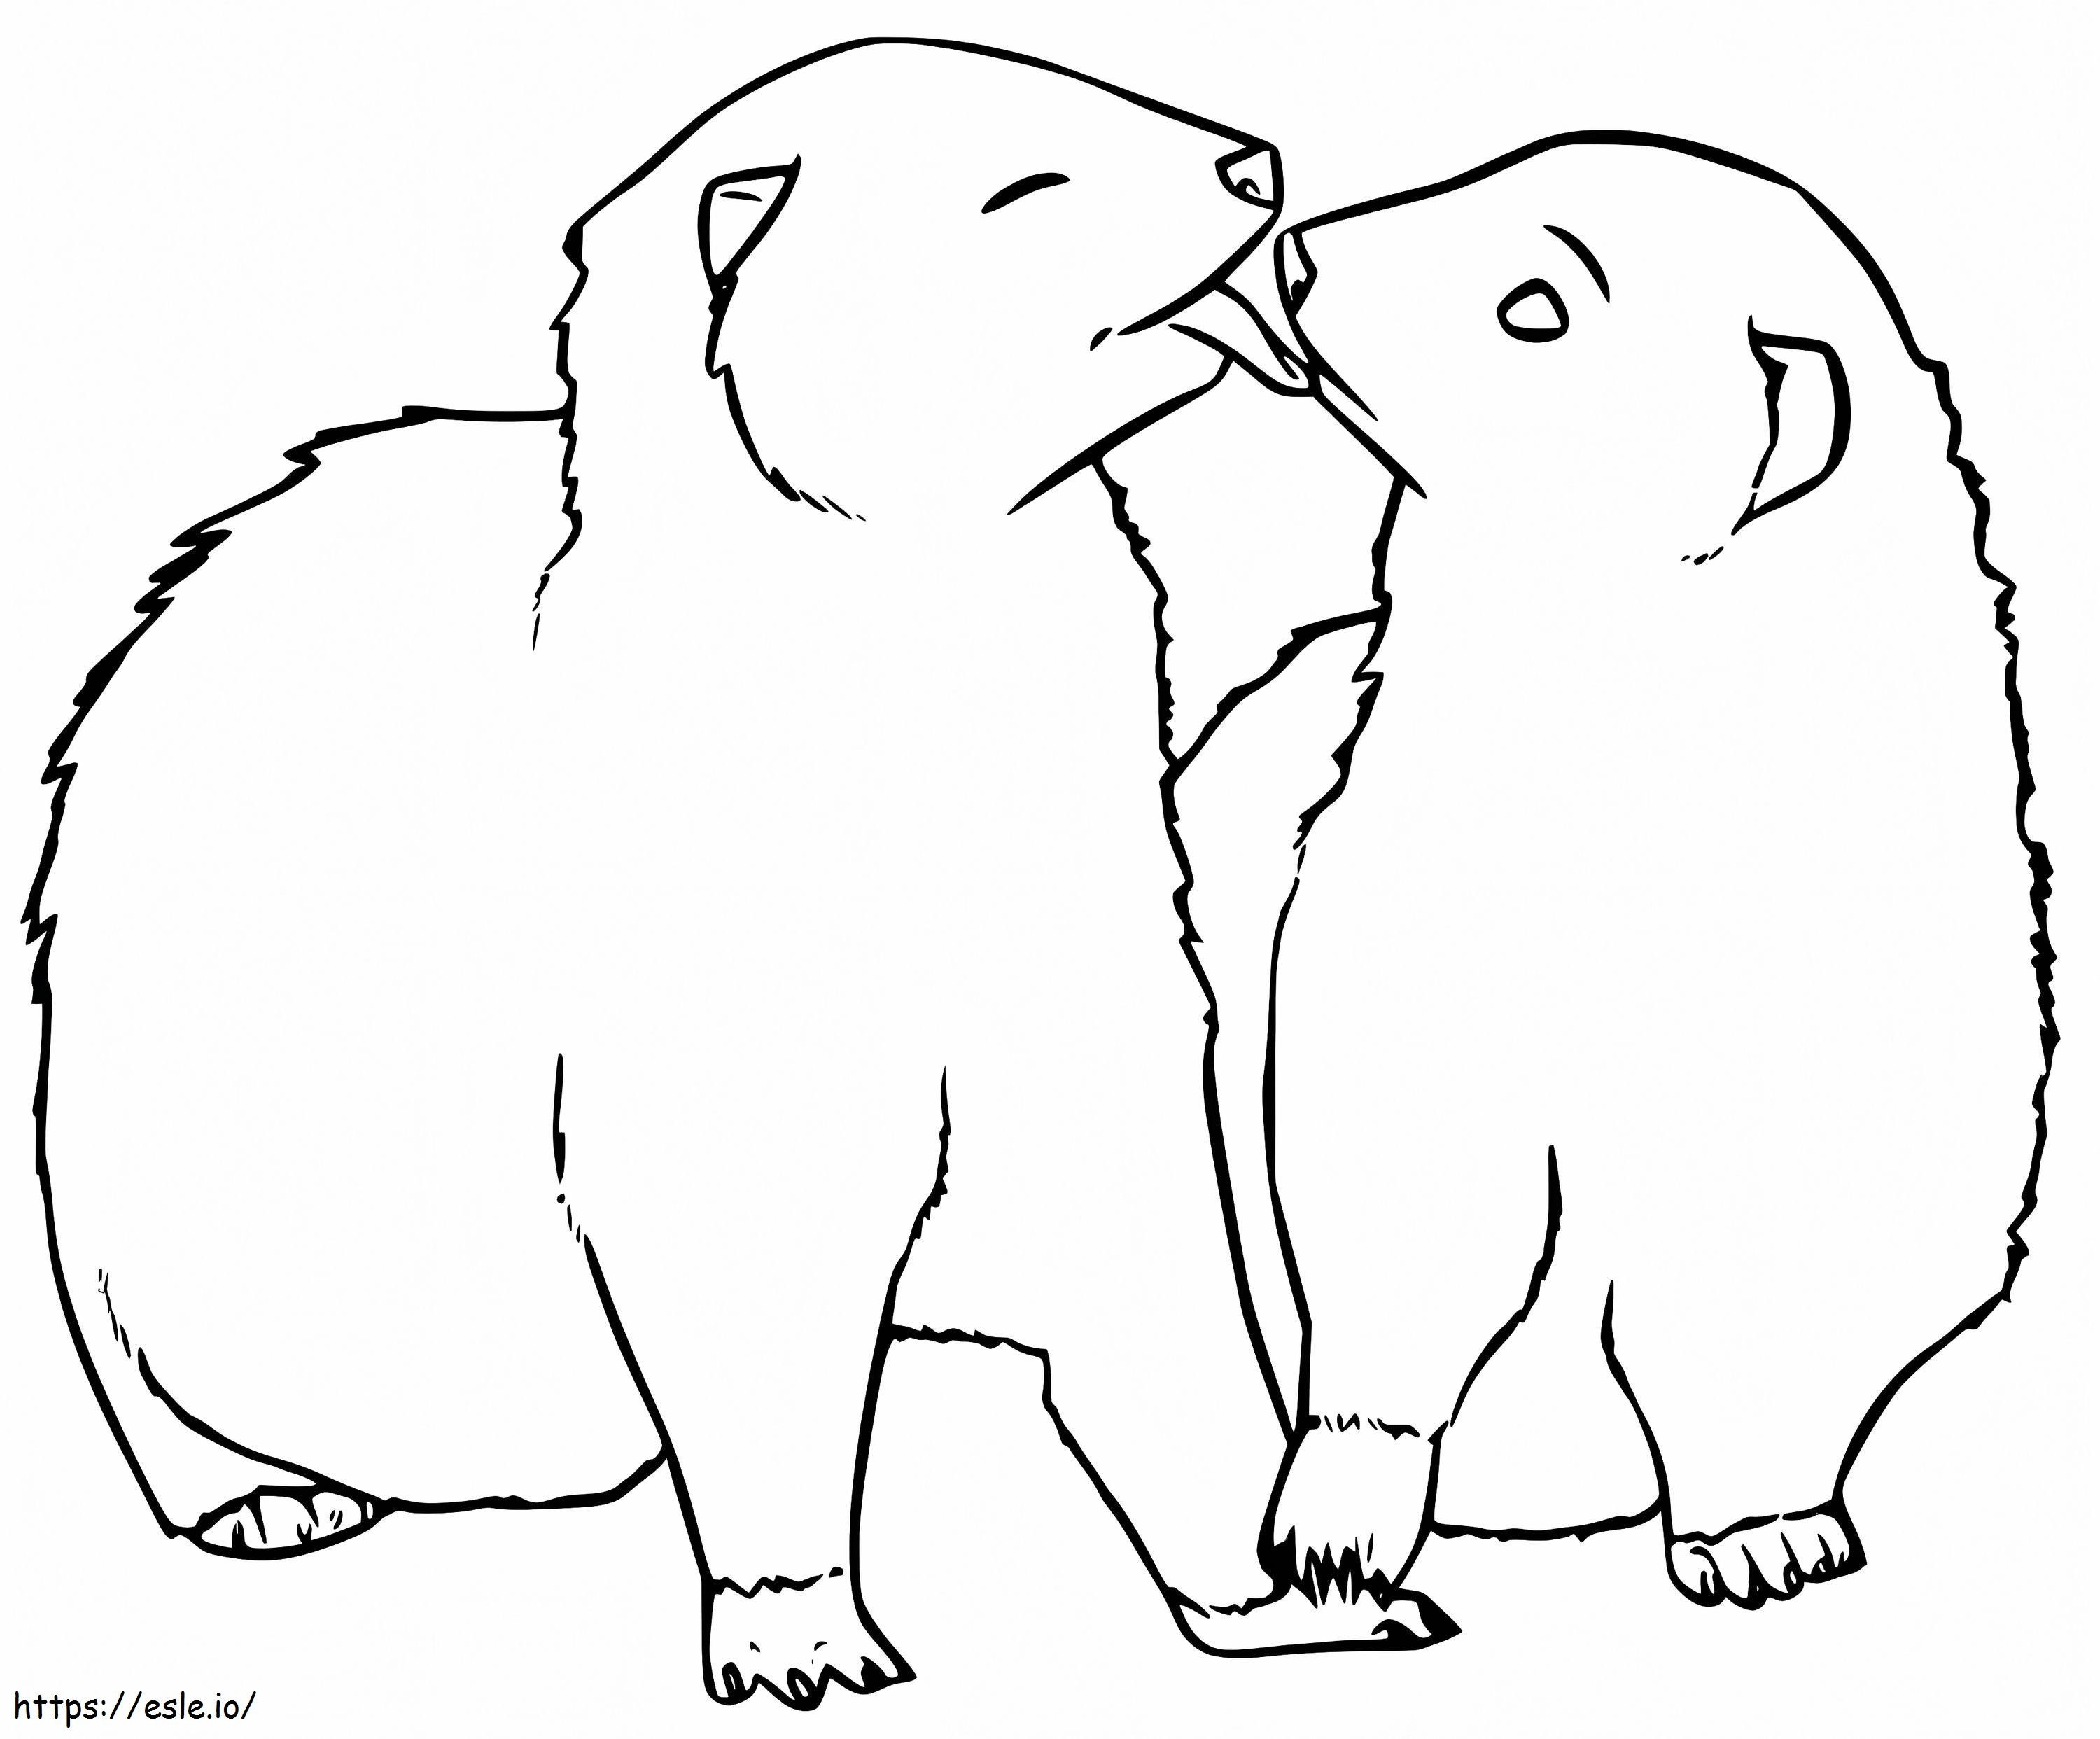 Ferrets coloring page